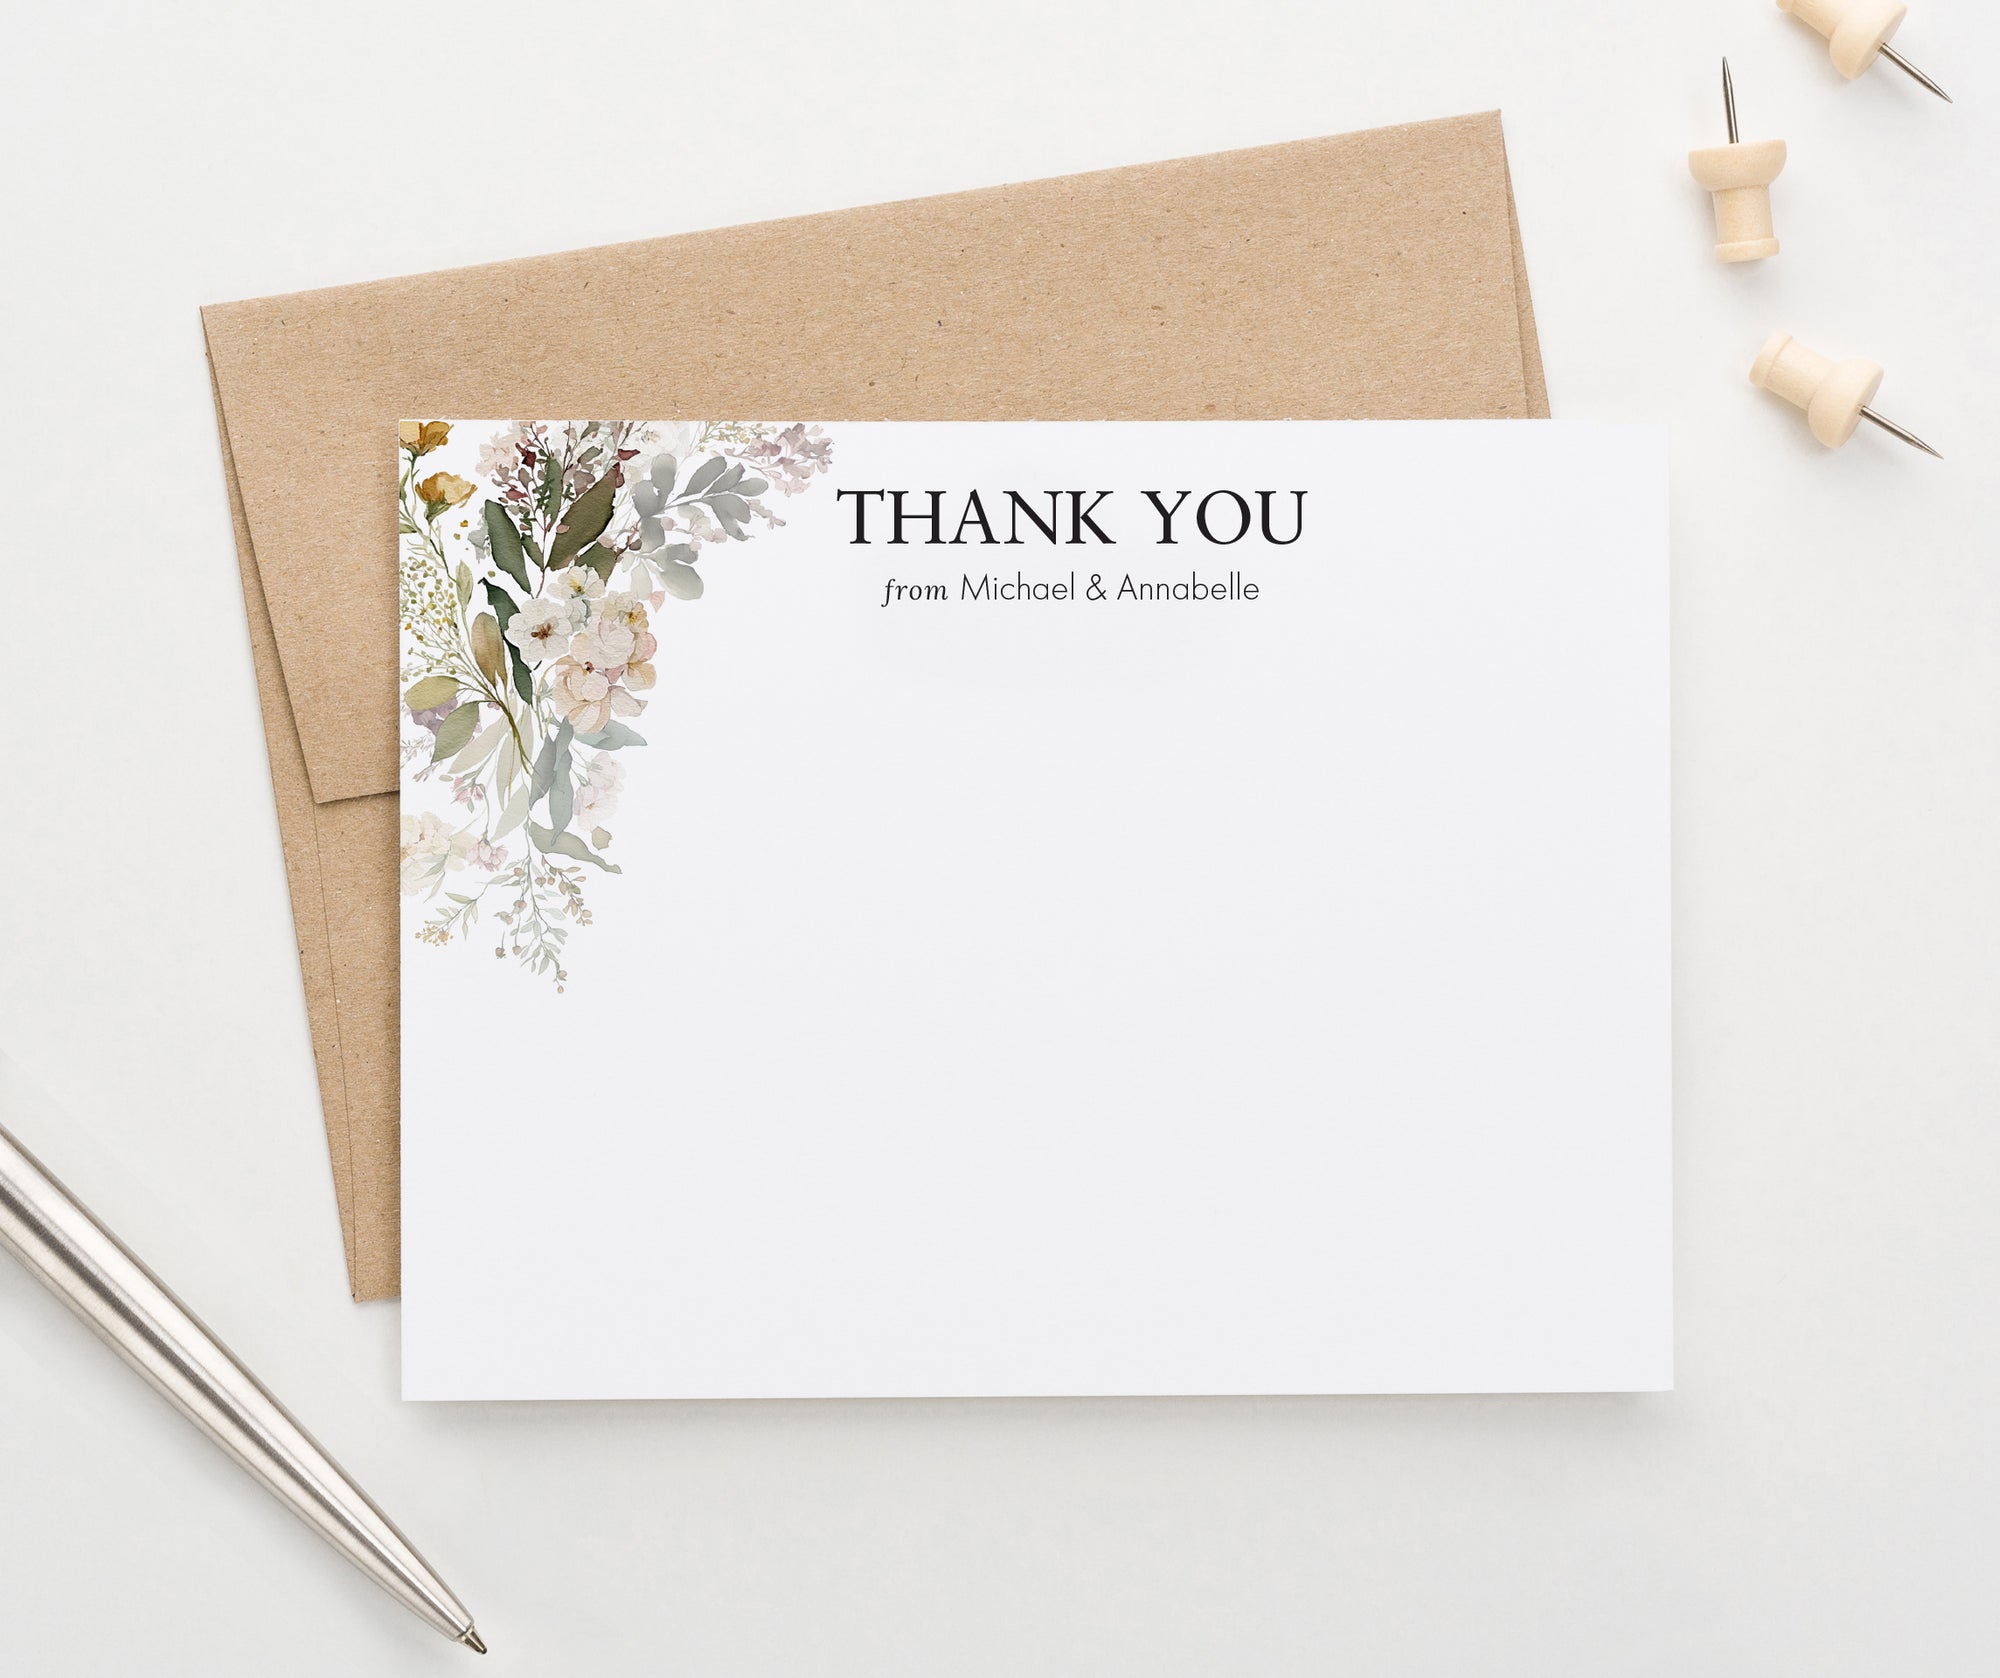 Custom Wedding Thank You Cards With Florals